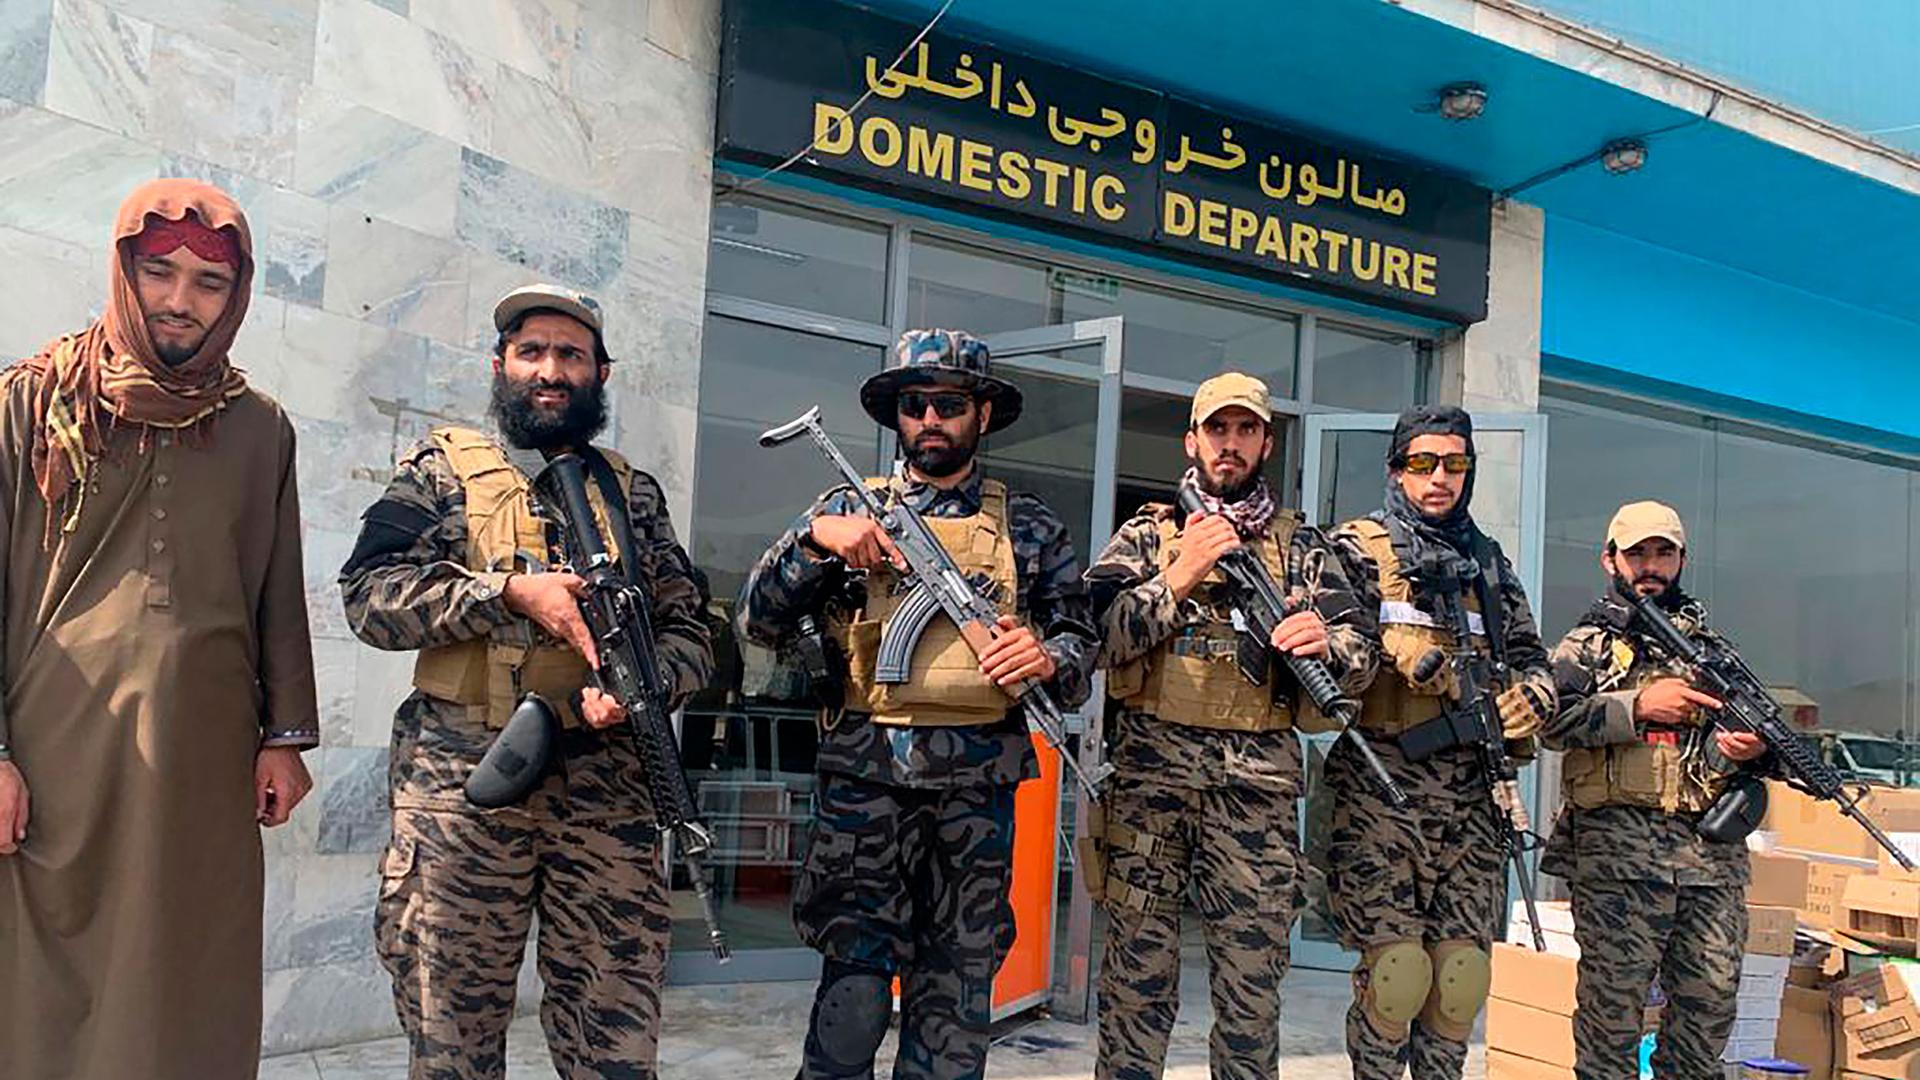 A group of six men are shown holding guns and wearing military fatigues with the domestic departure entrance to the Kabul airport.